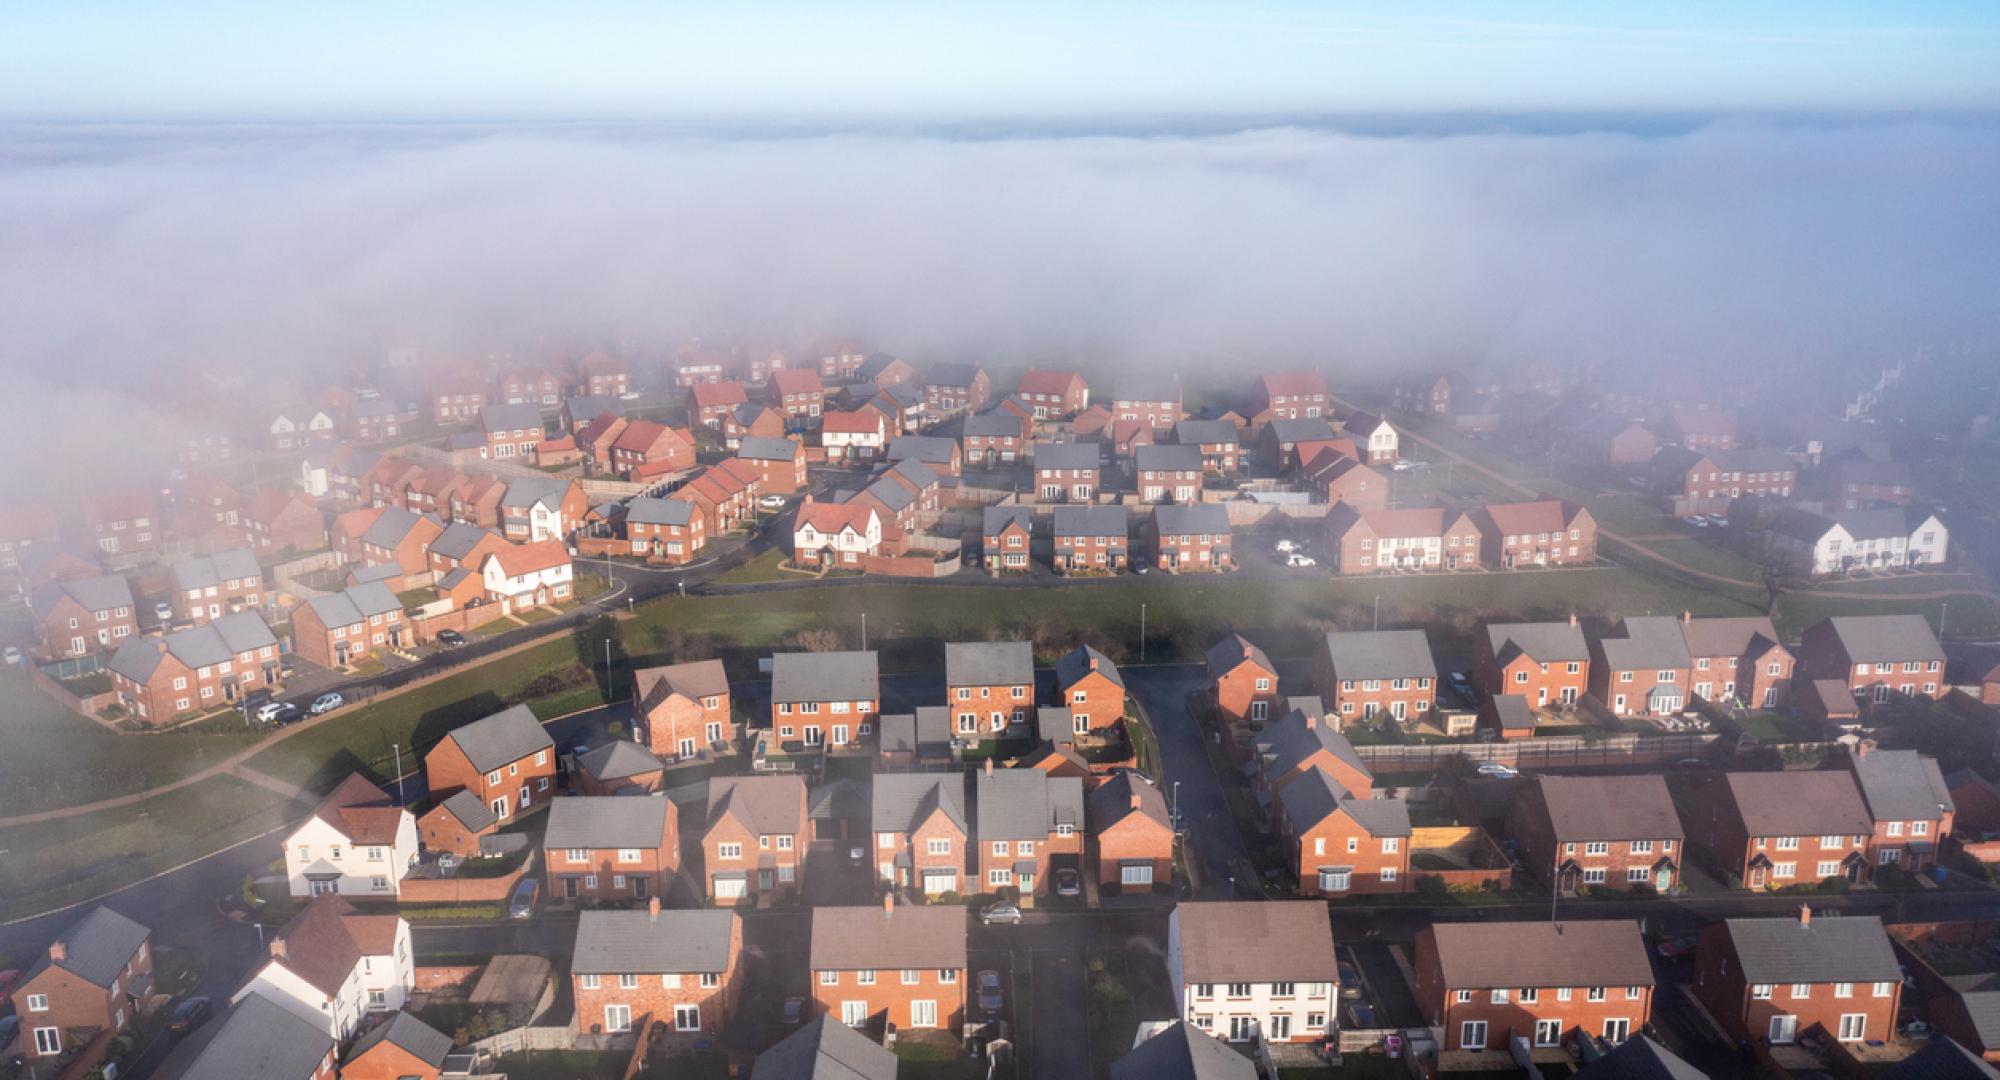 New estate with typical British houses and green gardens hidden by clouds